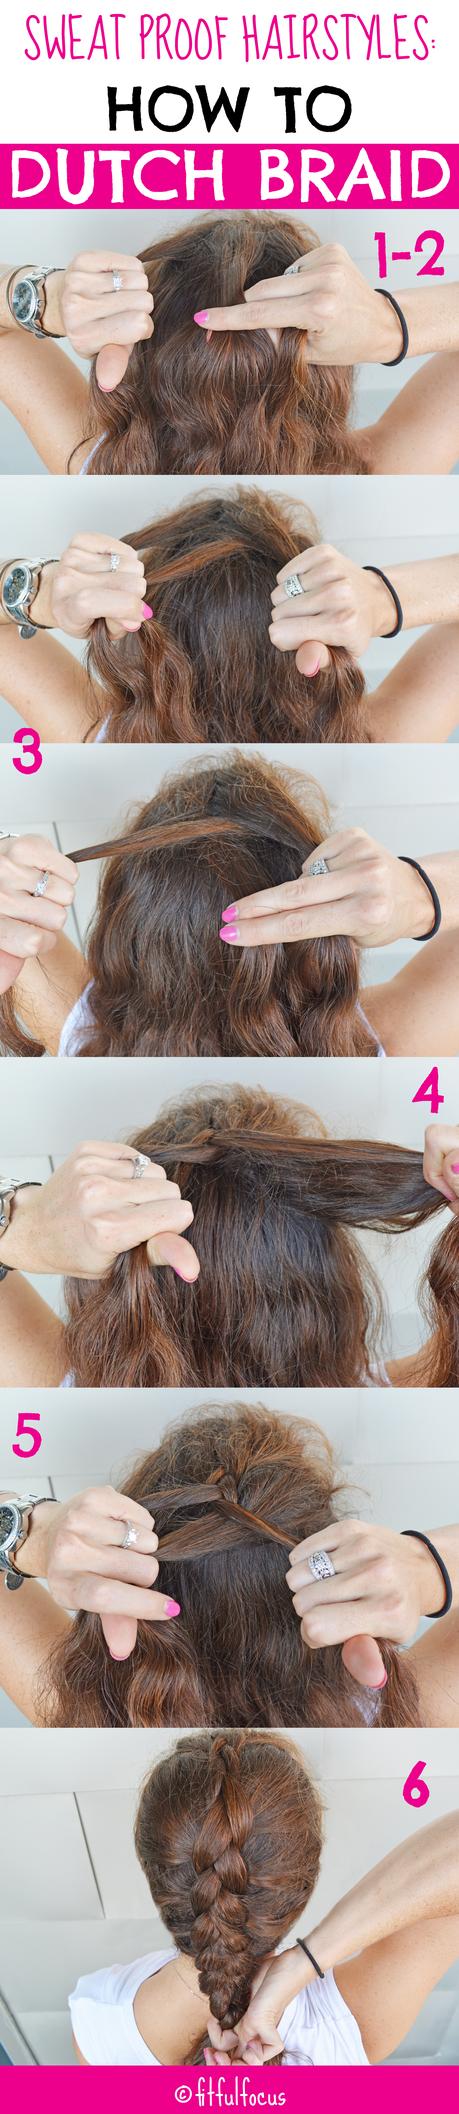 Sweat Proof Hairstyles: How To Dutch Braid